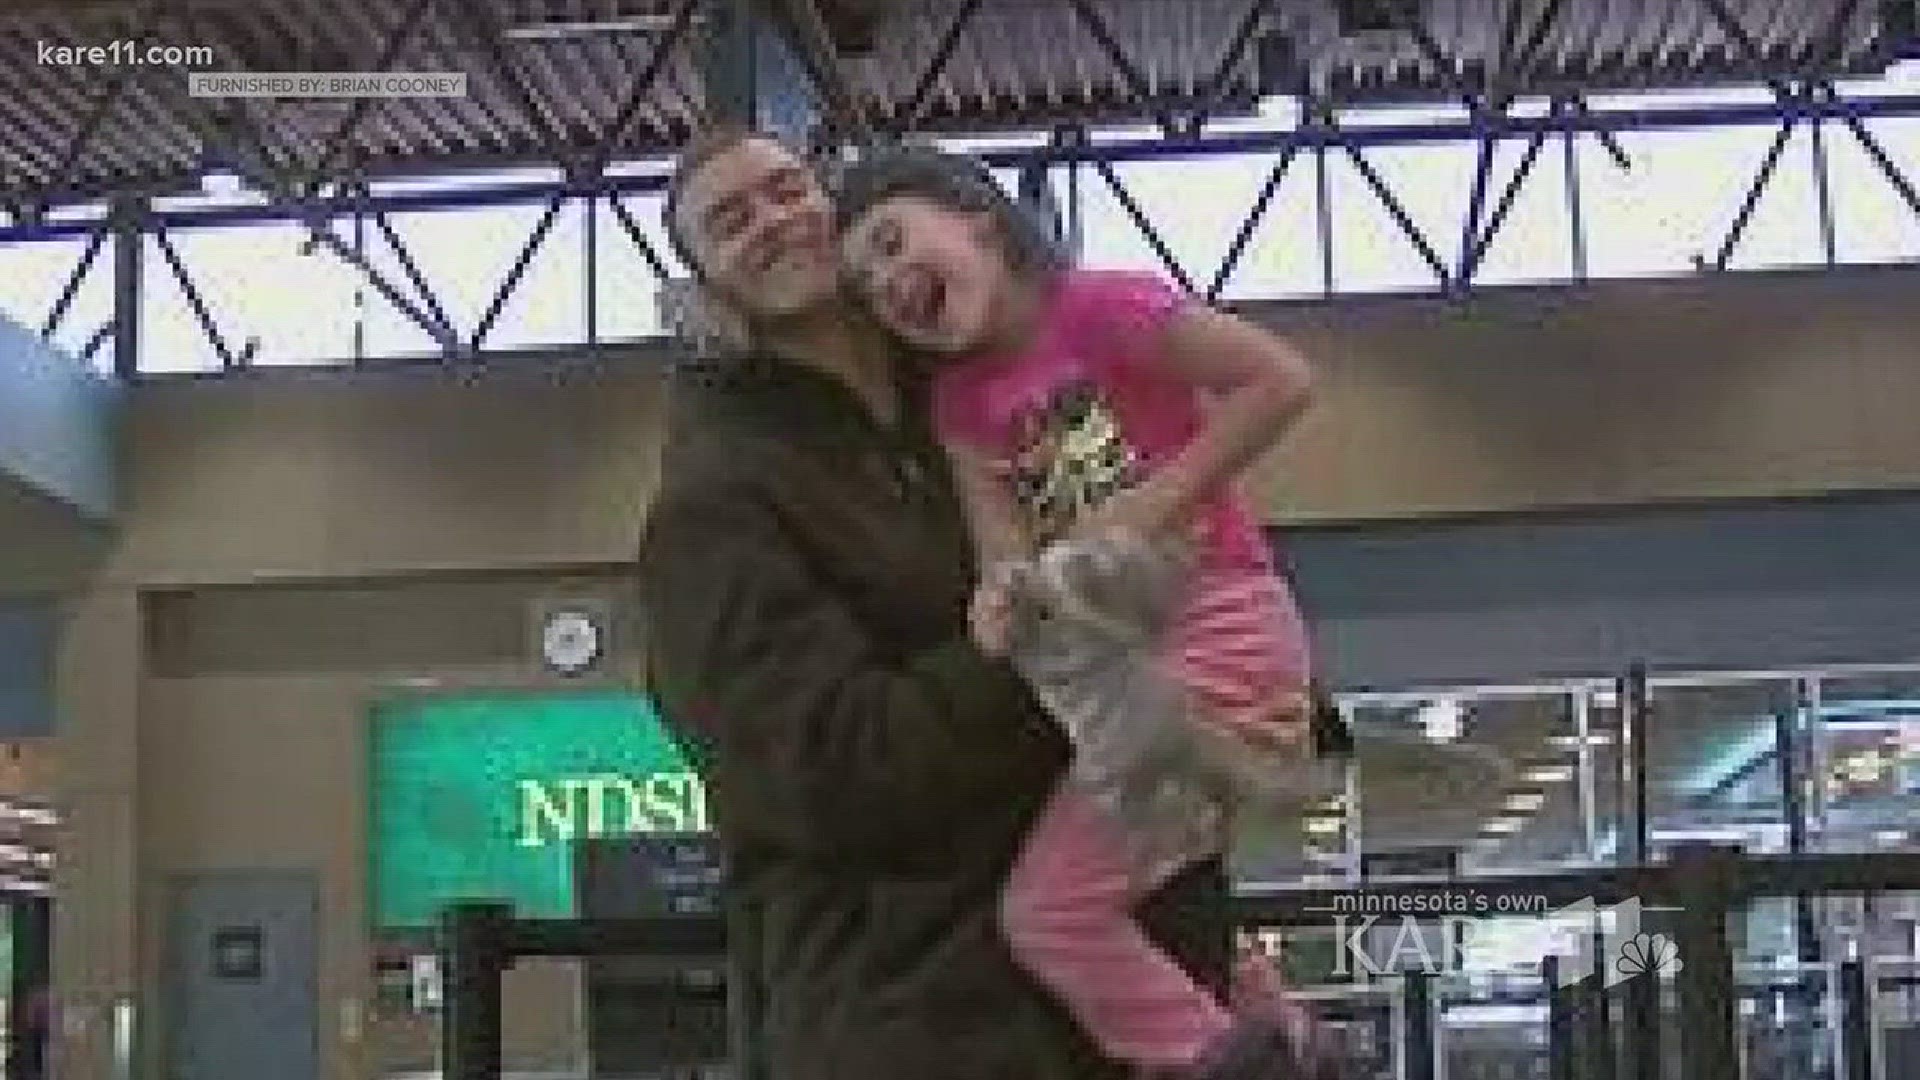 A Perham dad is making his voice heard at the Minnesota State Capitol, after his daughter disappeared last year. Tomorrow, it'll be one year since she returned safely - and her dad wants to help others faced with family abductions.